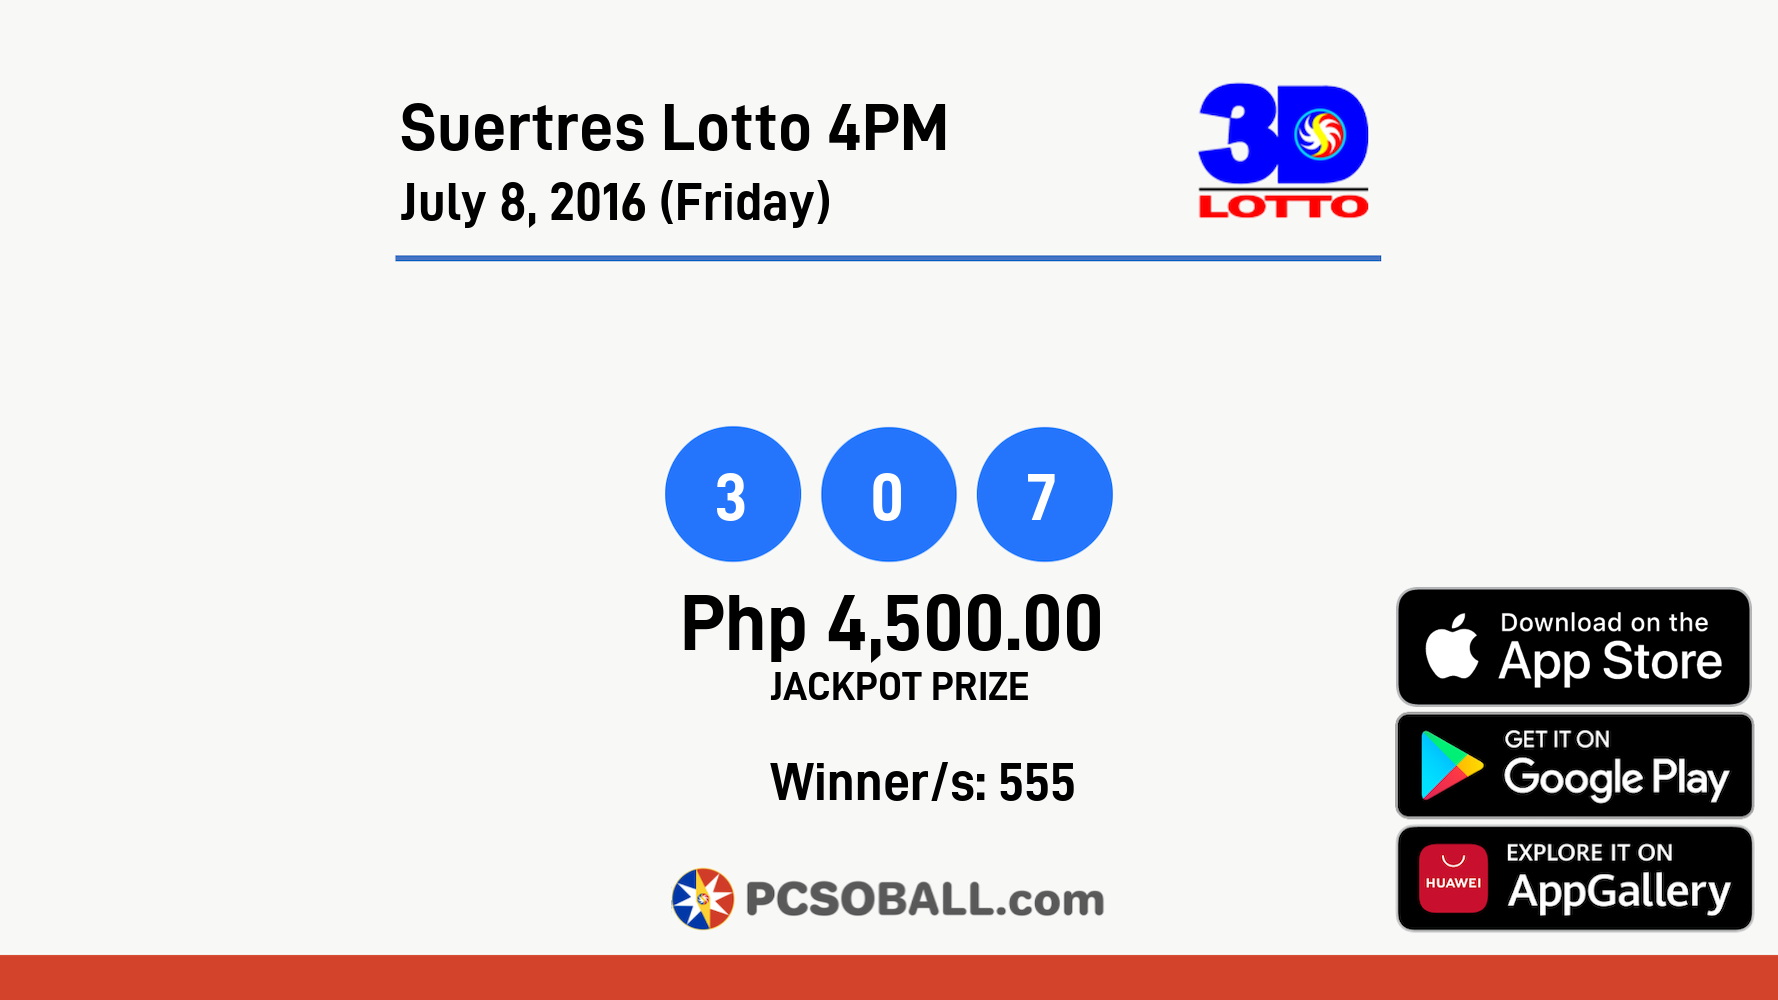 Suertres Lotto 4PM July 8, 2016 (Friday) Result